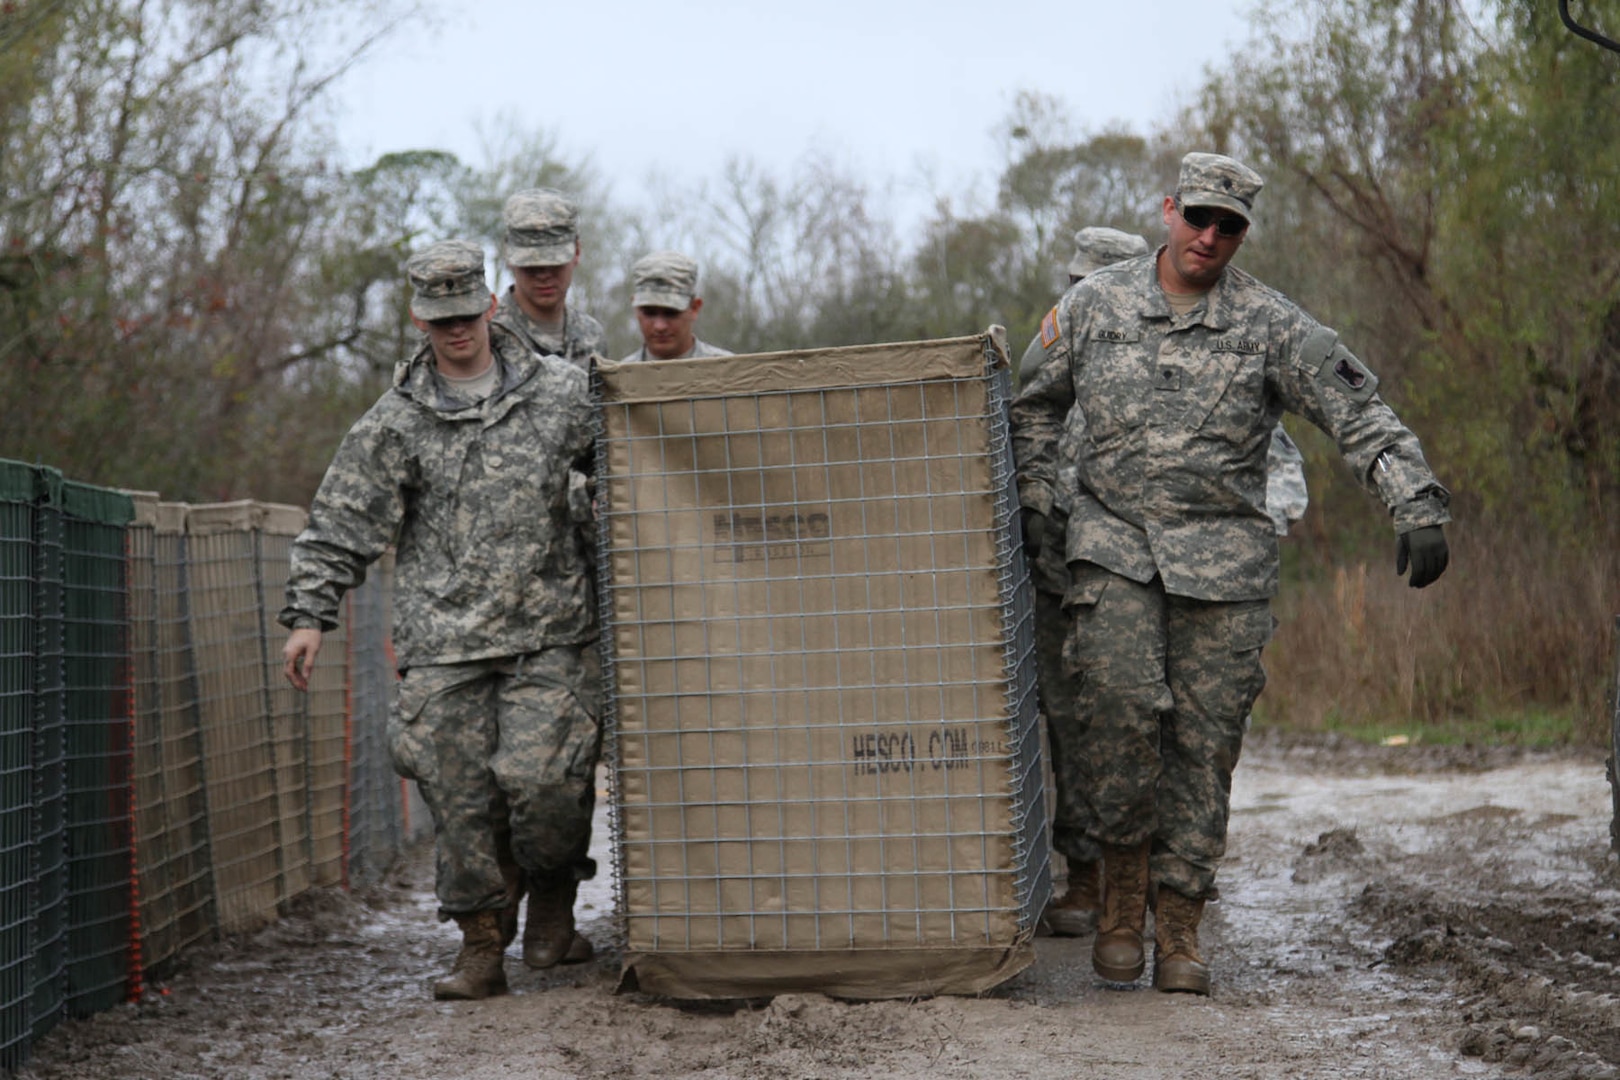 Louisiana National Guard Spc. Scott Mouton, of Baton Rouge, Spc. Mason Guidry, of Breaux Bridge, and other Guard members carry a HESCO barrier on Avoca Island near Morgan City, La., Jan. 9, 2016. The barrier will be used in the construction of a 2-mile long levee to prevent backwater flooding from reaching Morgan City and other towns in South Louisiana due to high river levels. 